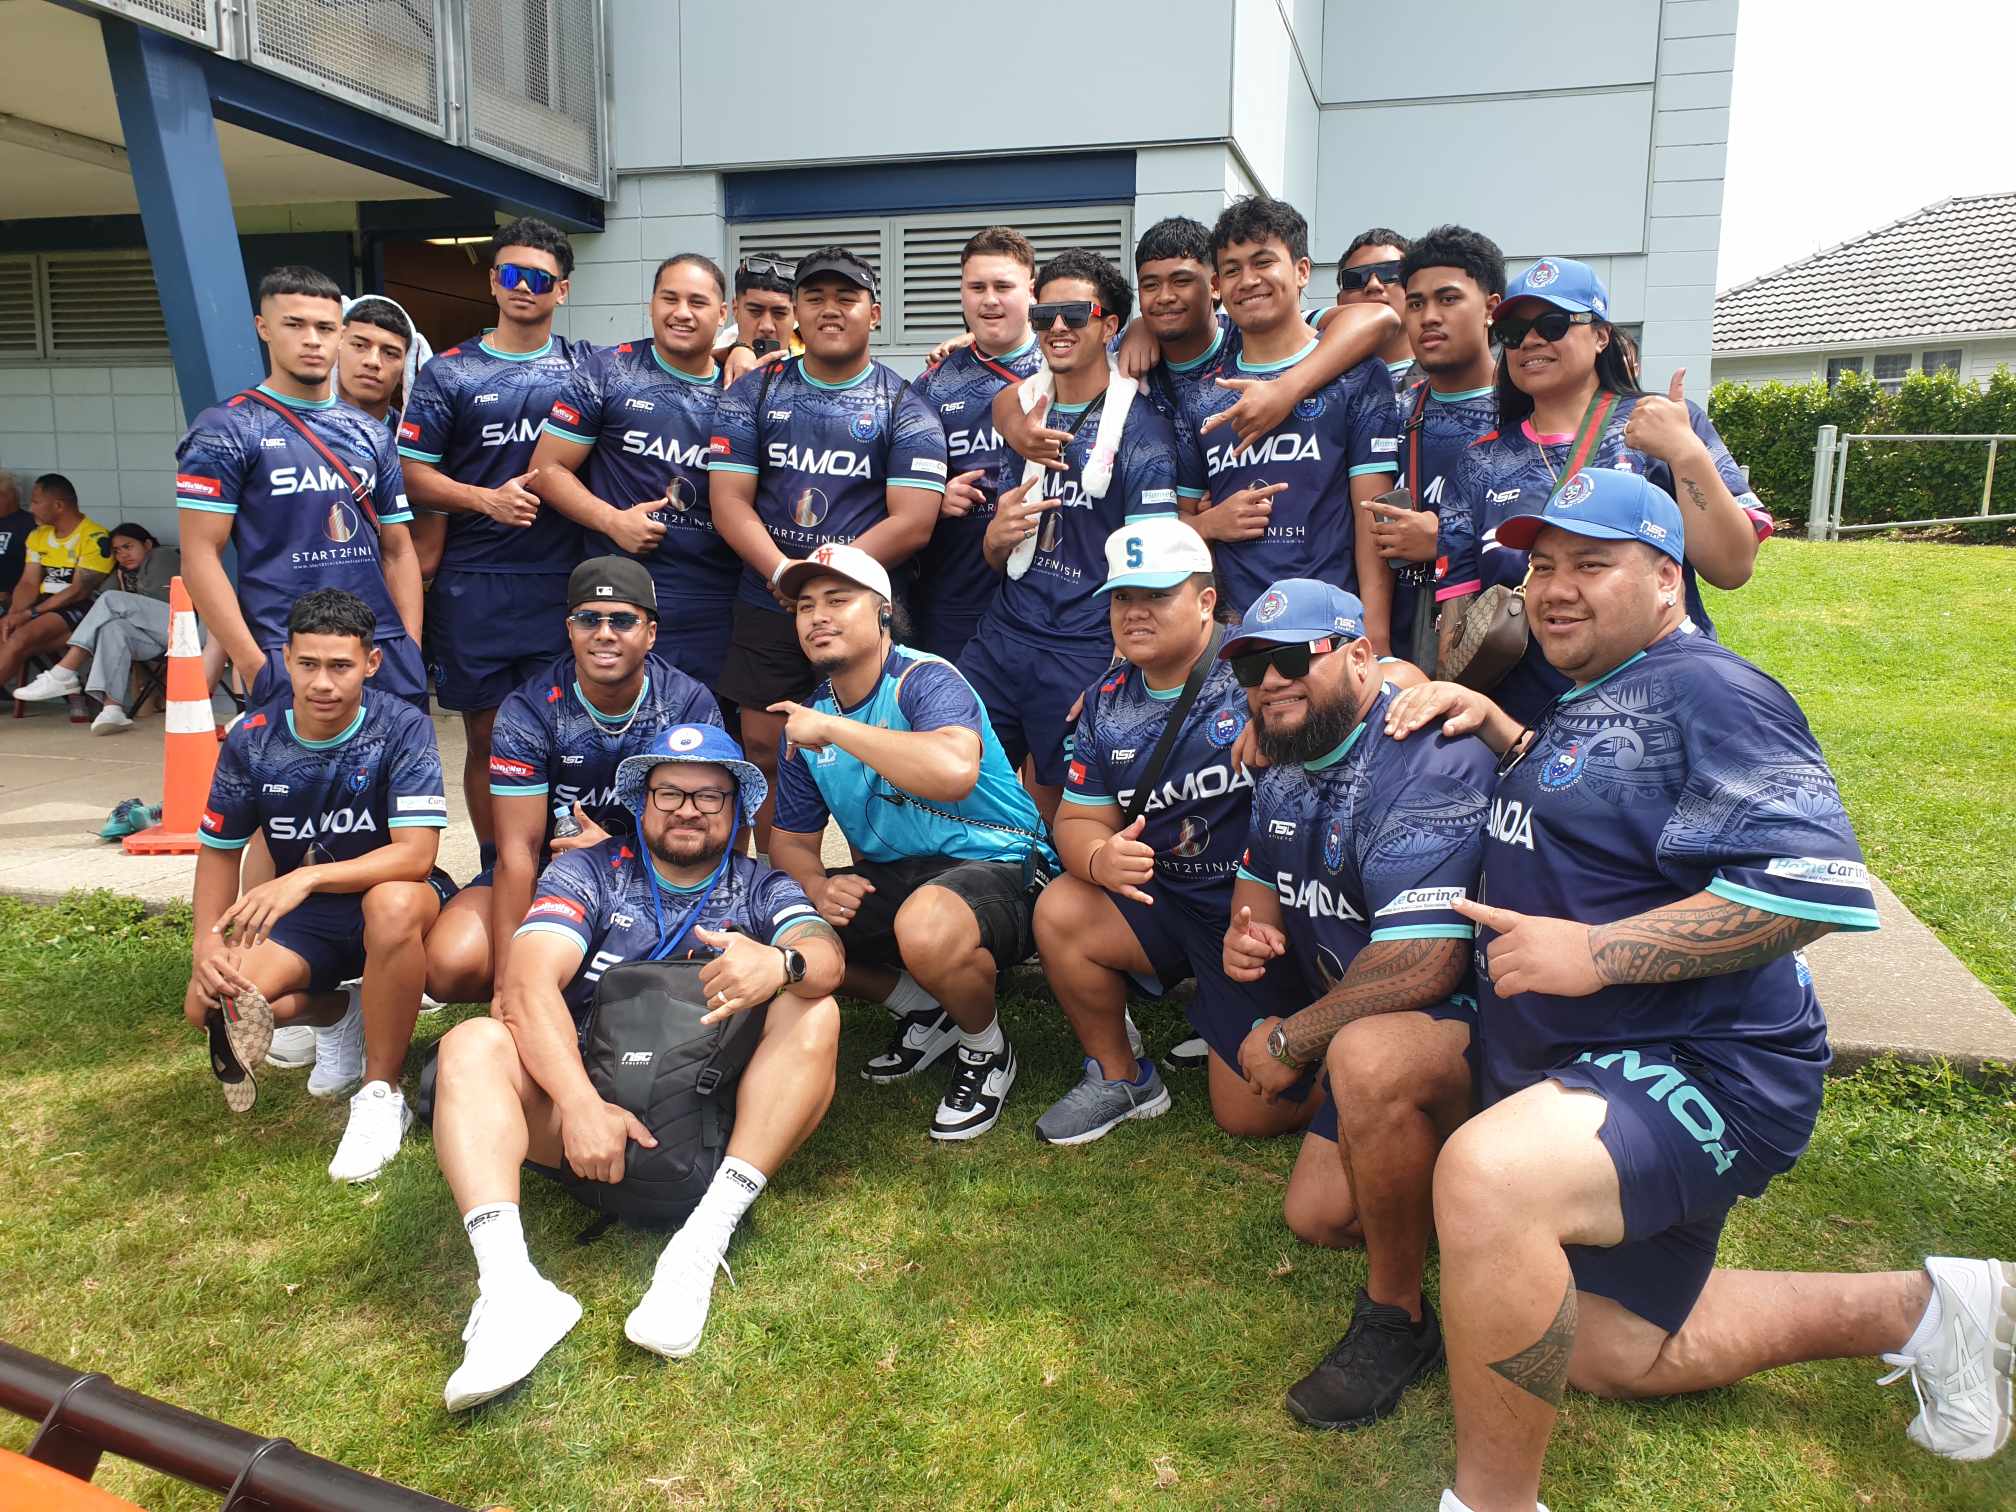 New South Wales Samoa rugby team